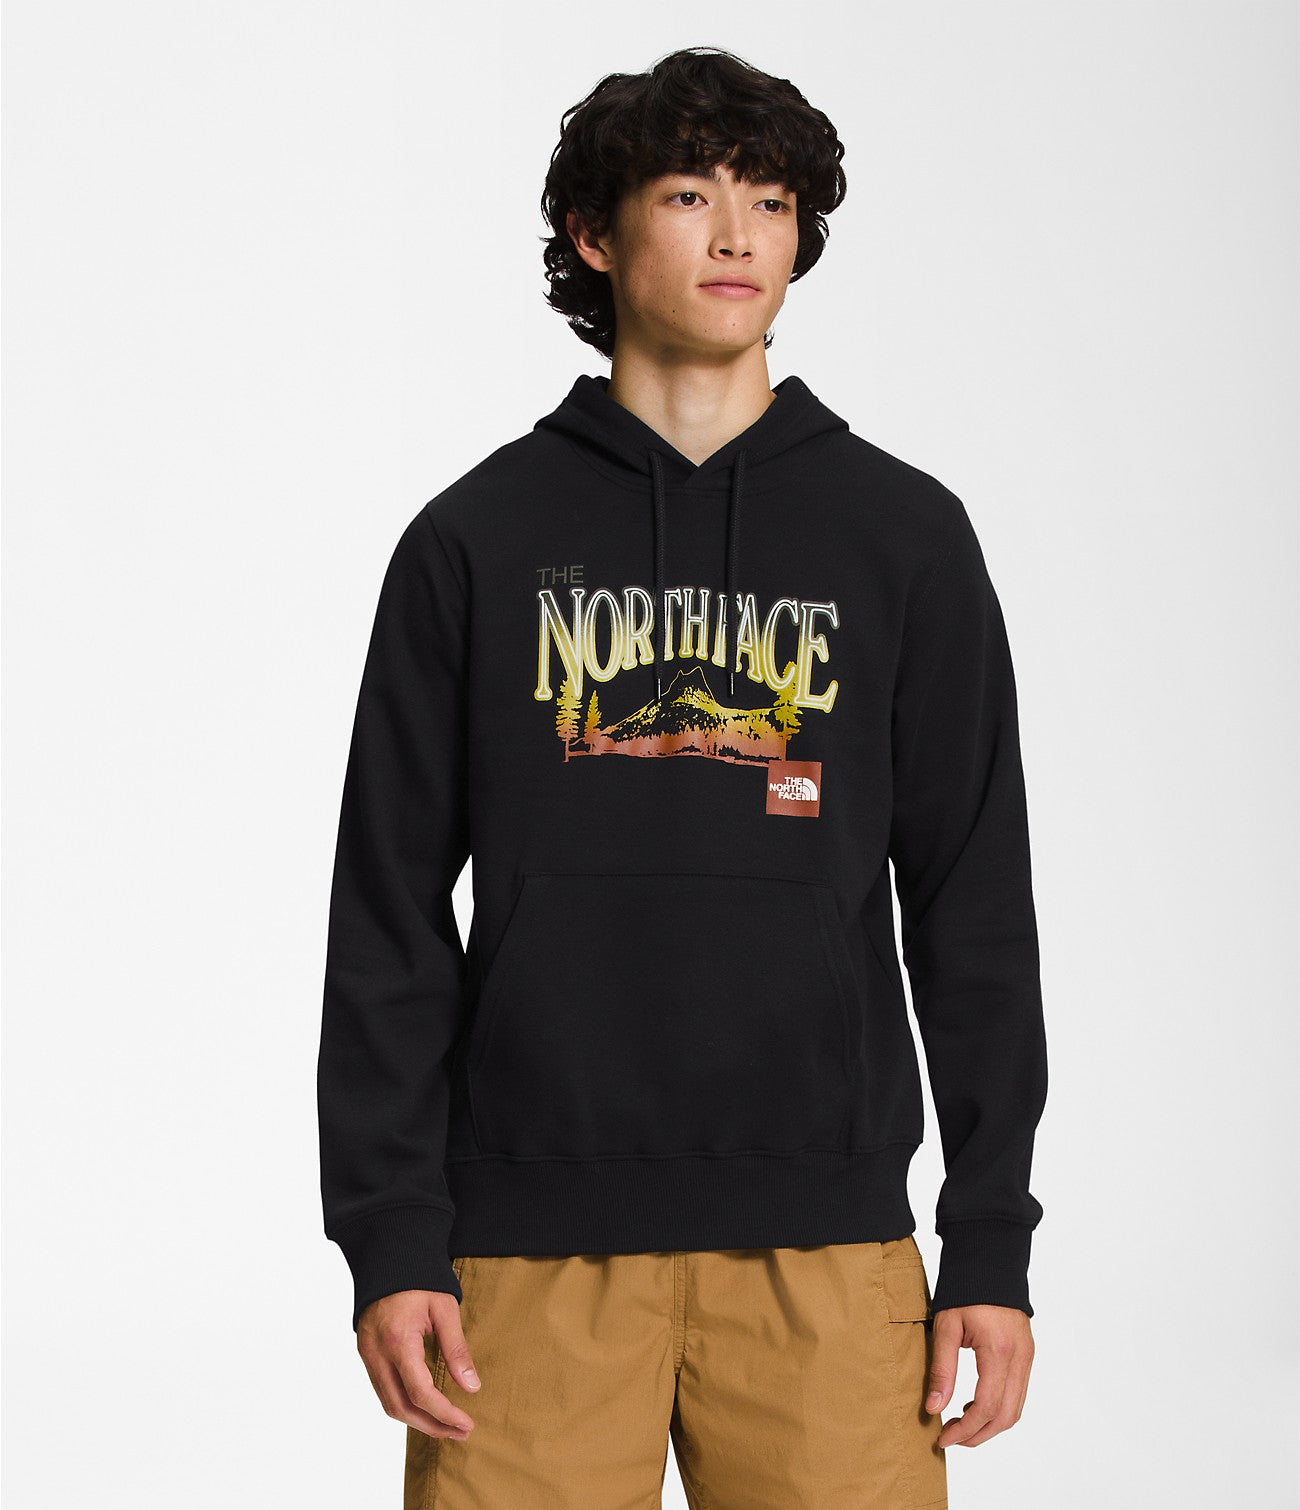 The North Face Men's Places We Love Hoody